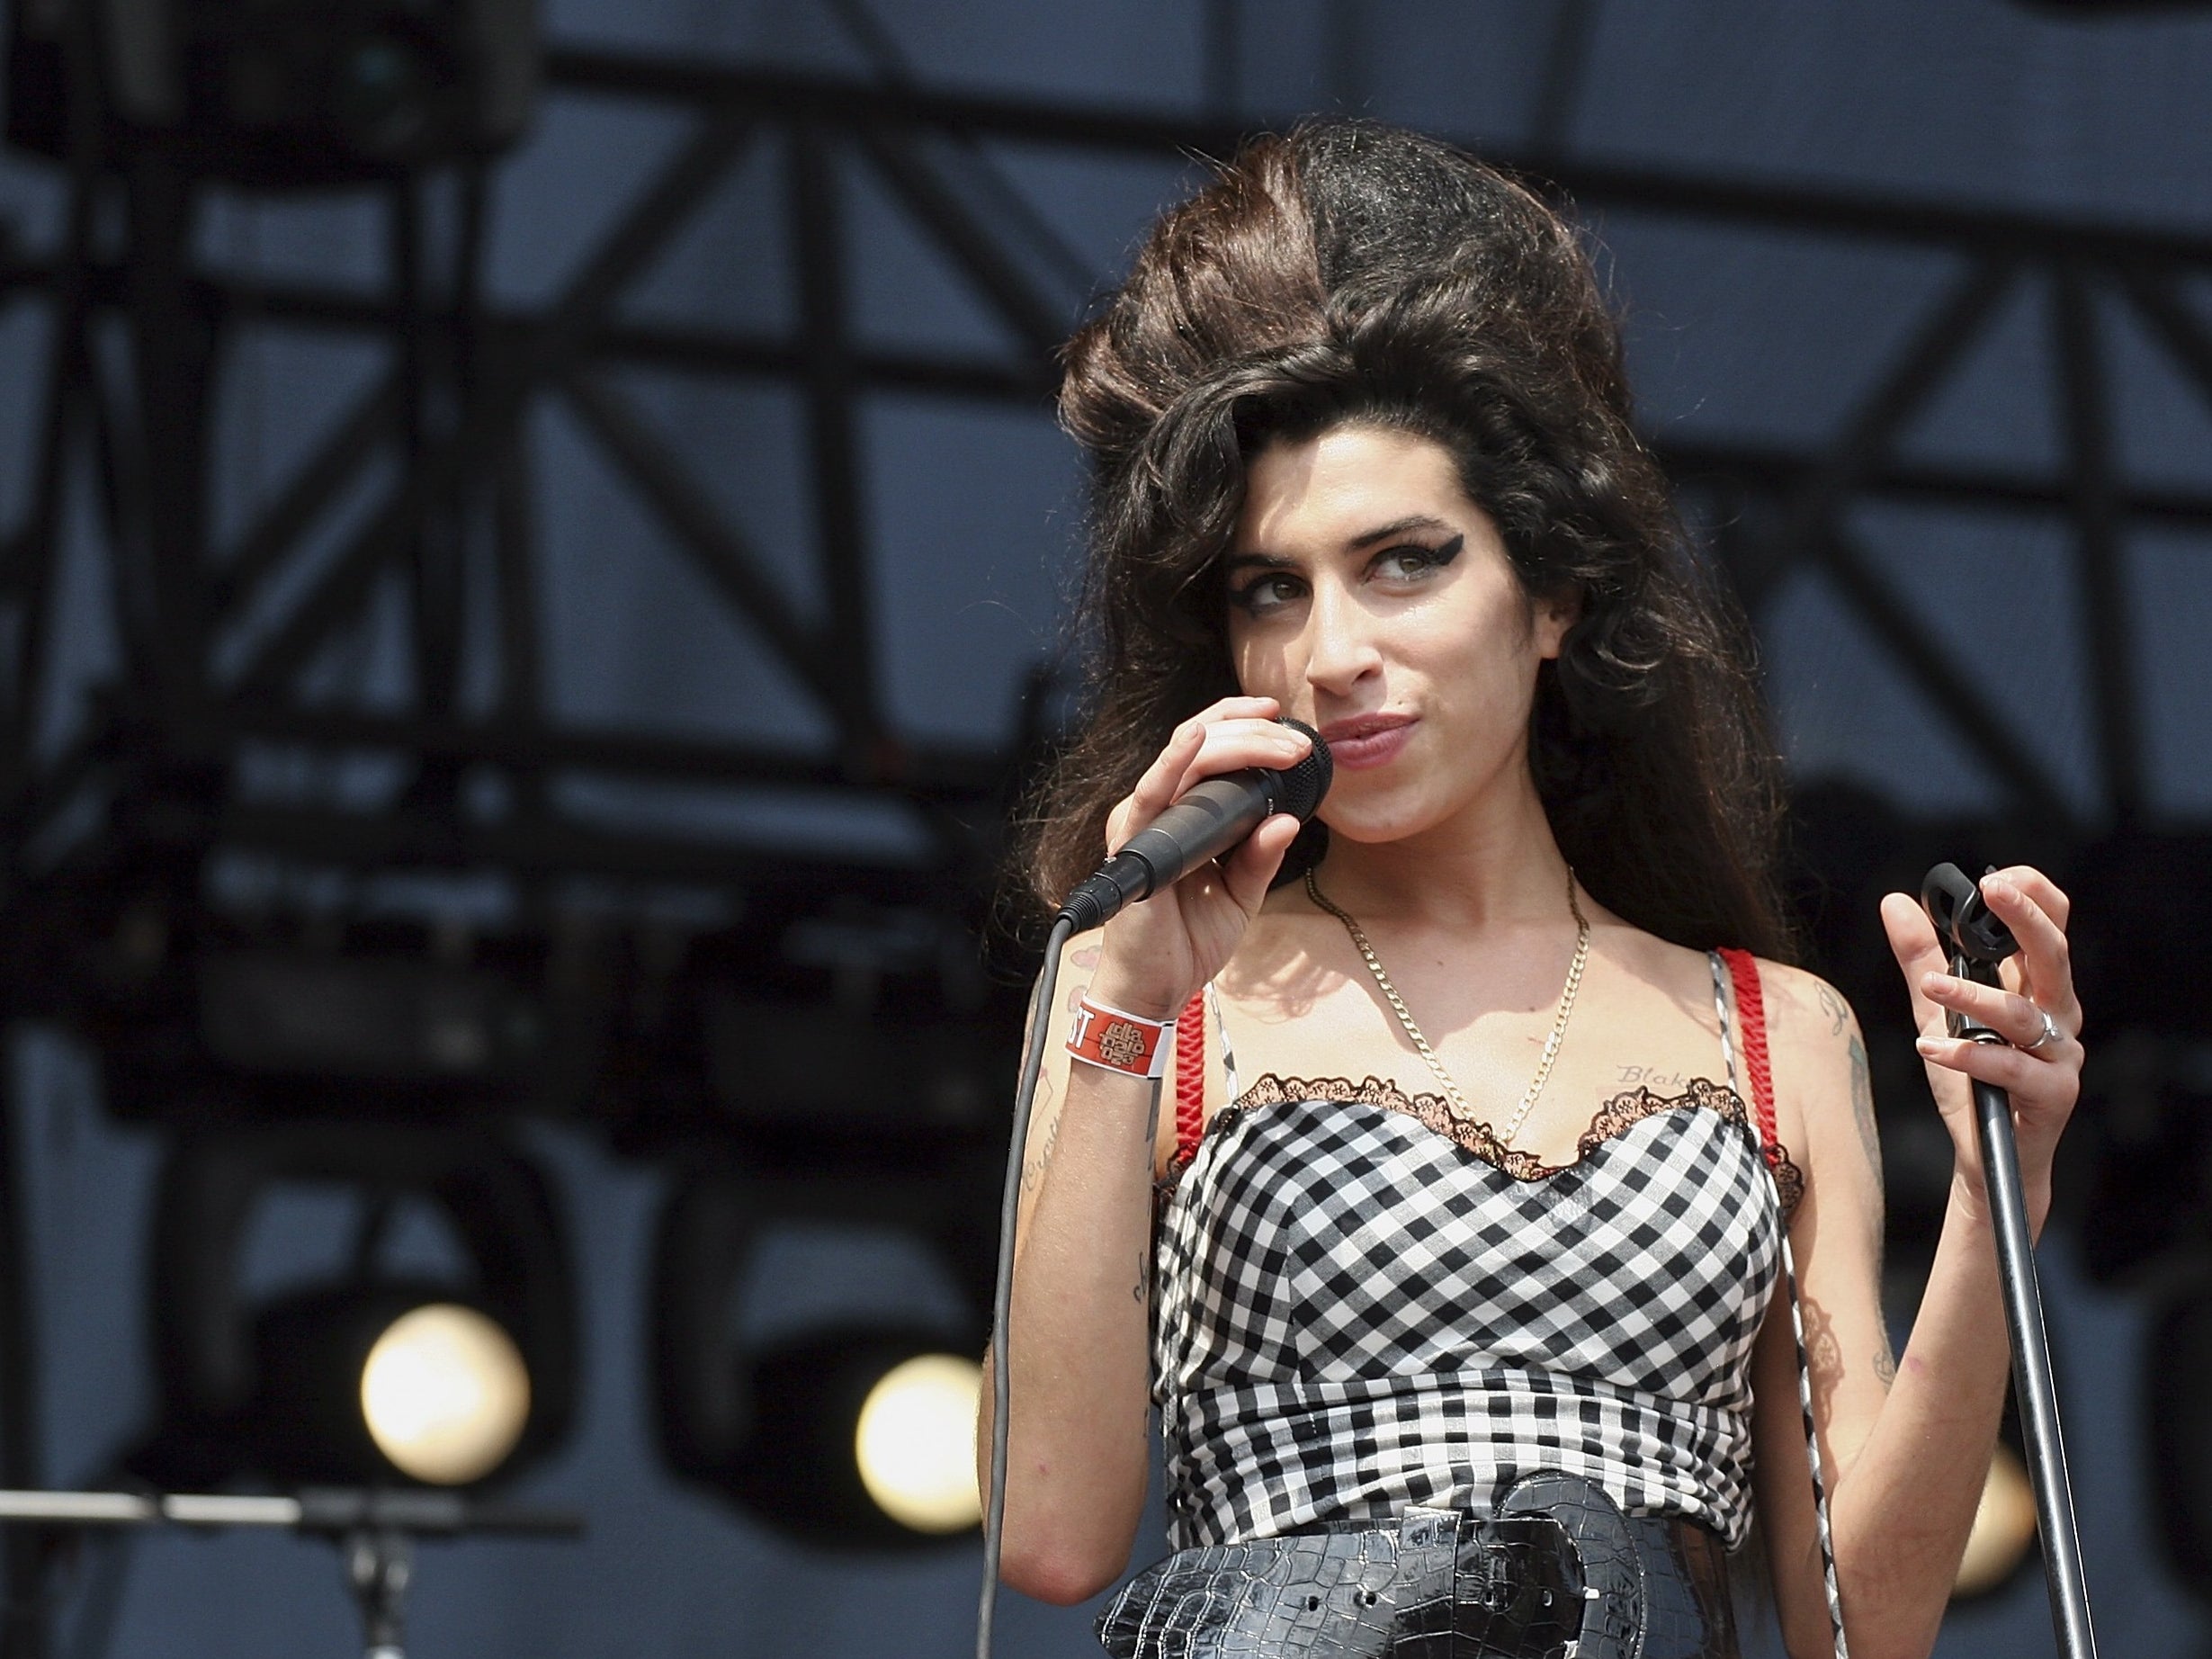 Amy Winehouse at Lollapalooza in 2007